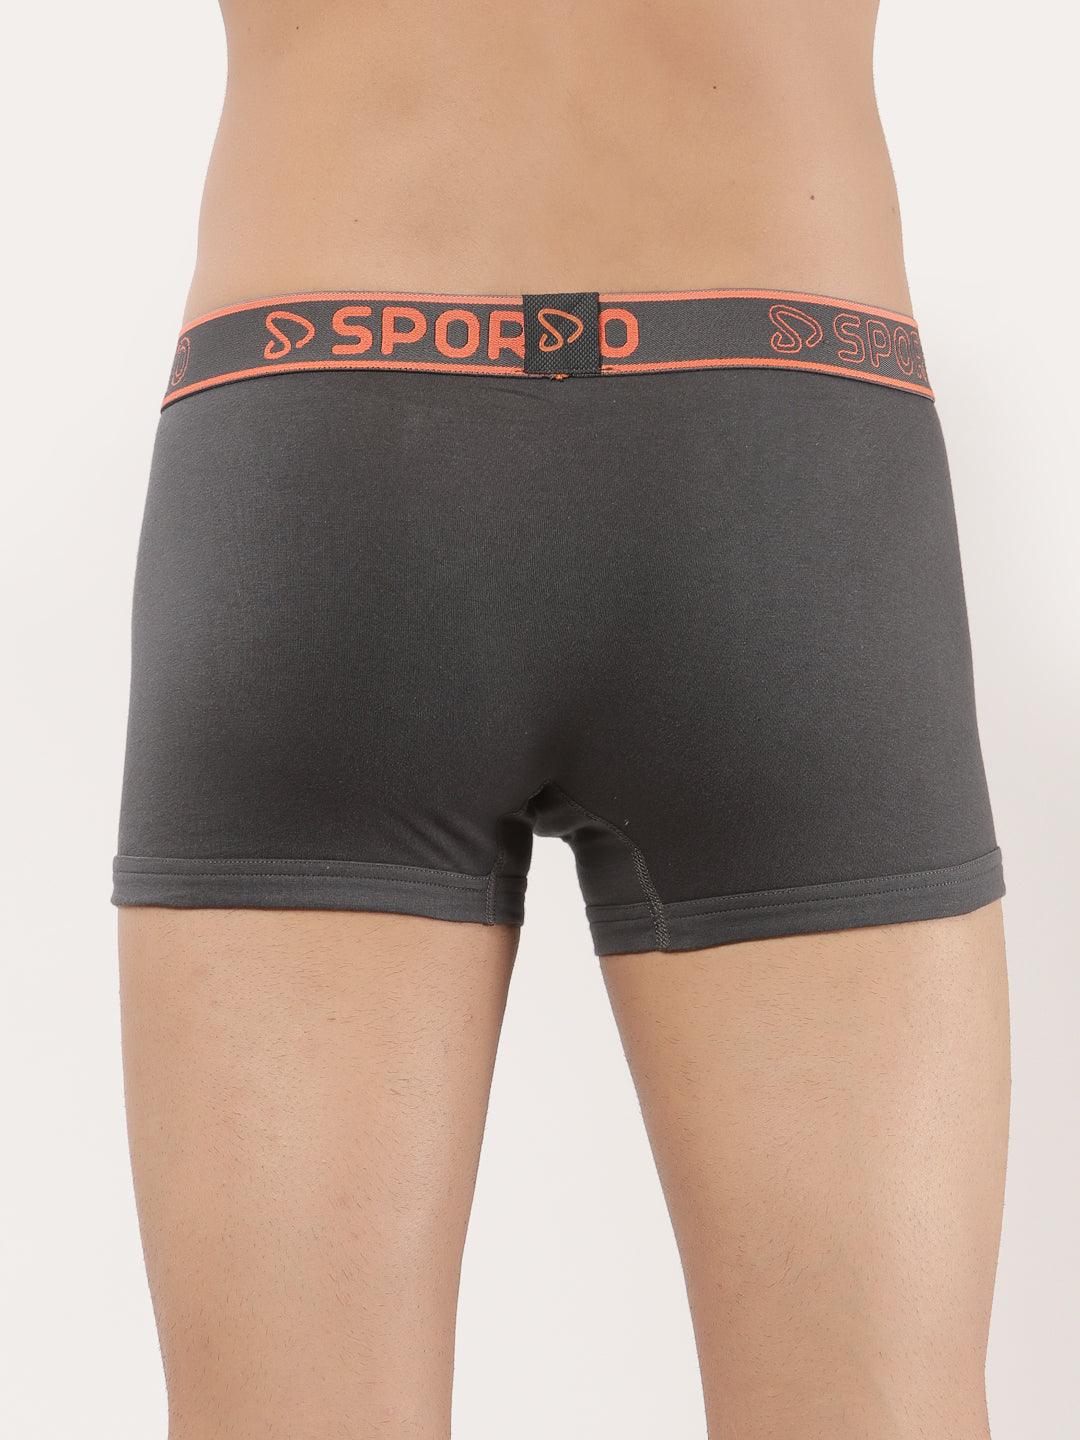 Sporto Men's Square Trunks (Pack Of 2) - Black and Charcoal